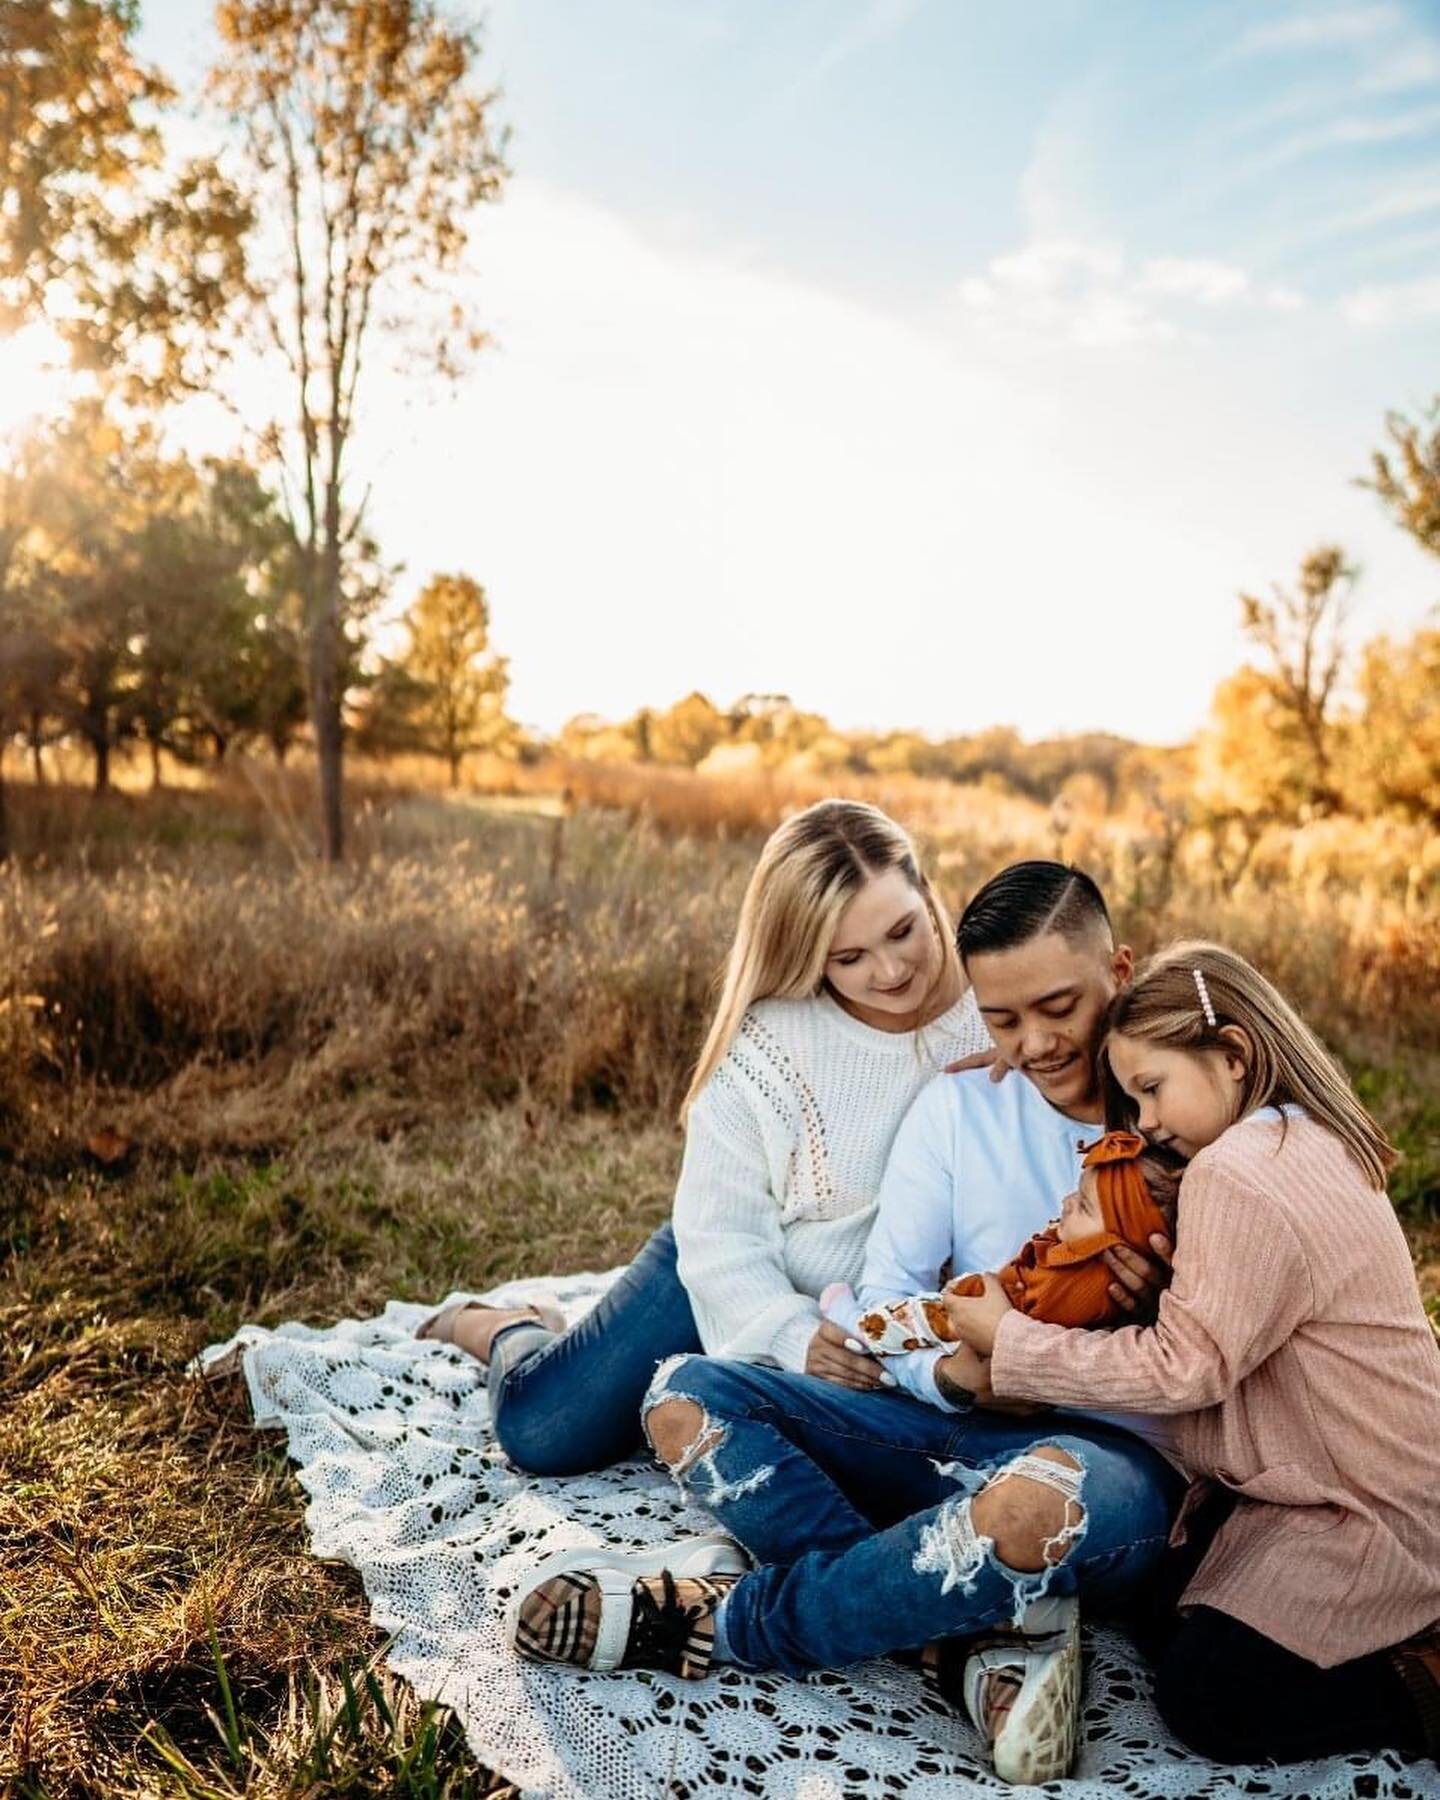 A gorgeous outdoor newborn sesh! Updating the gram really makes me miss the fall scene. 🍂🌾